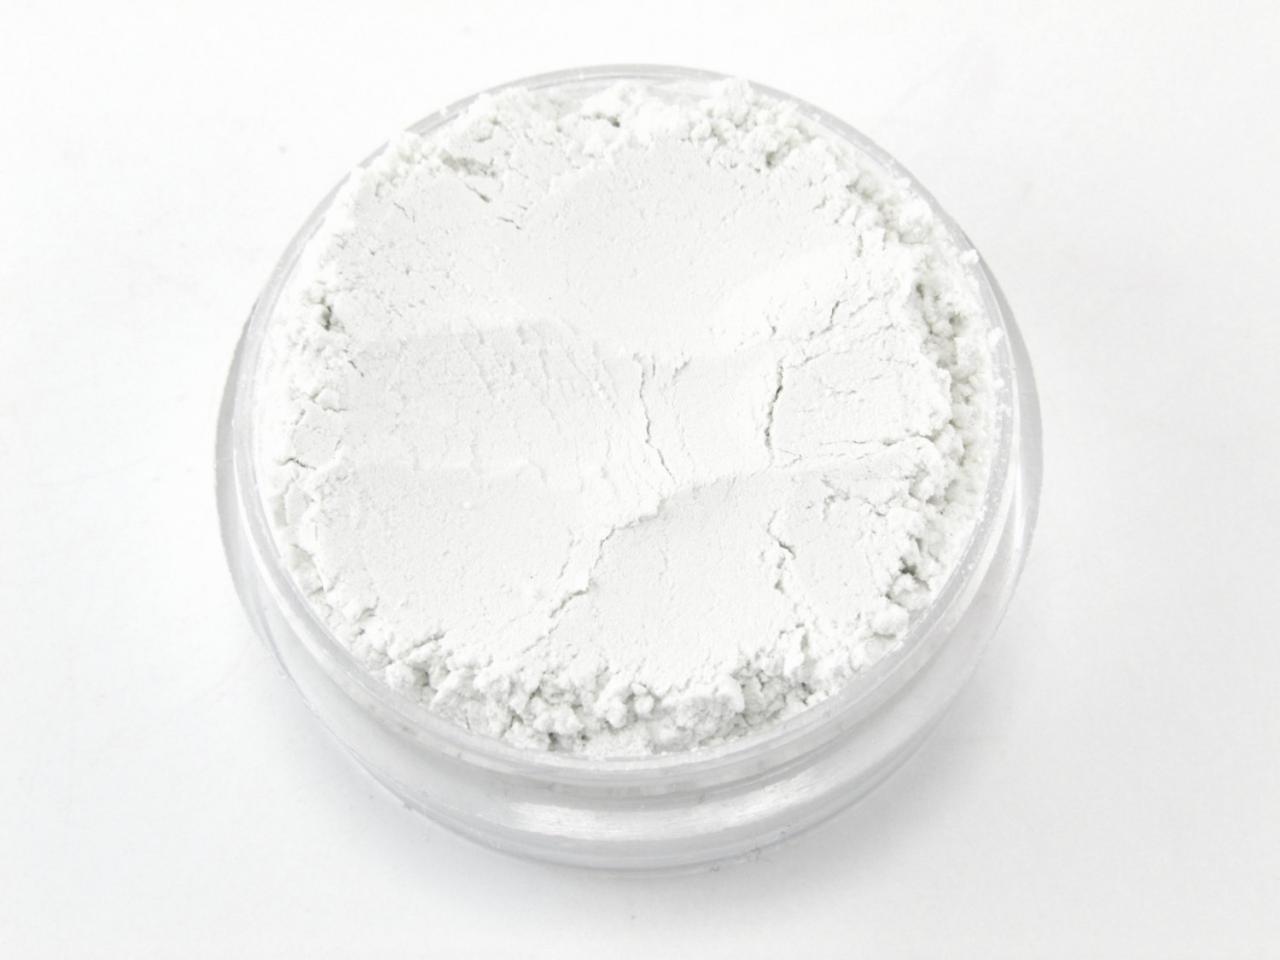 Mineral Makeup - Oil Control Powder/finisher - Matte This Sample